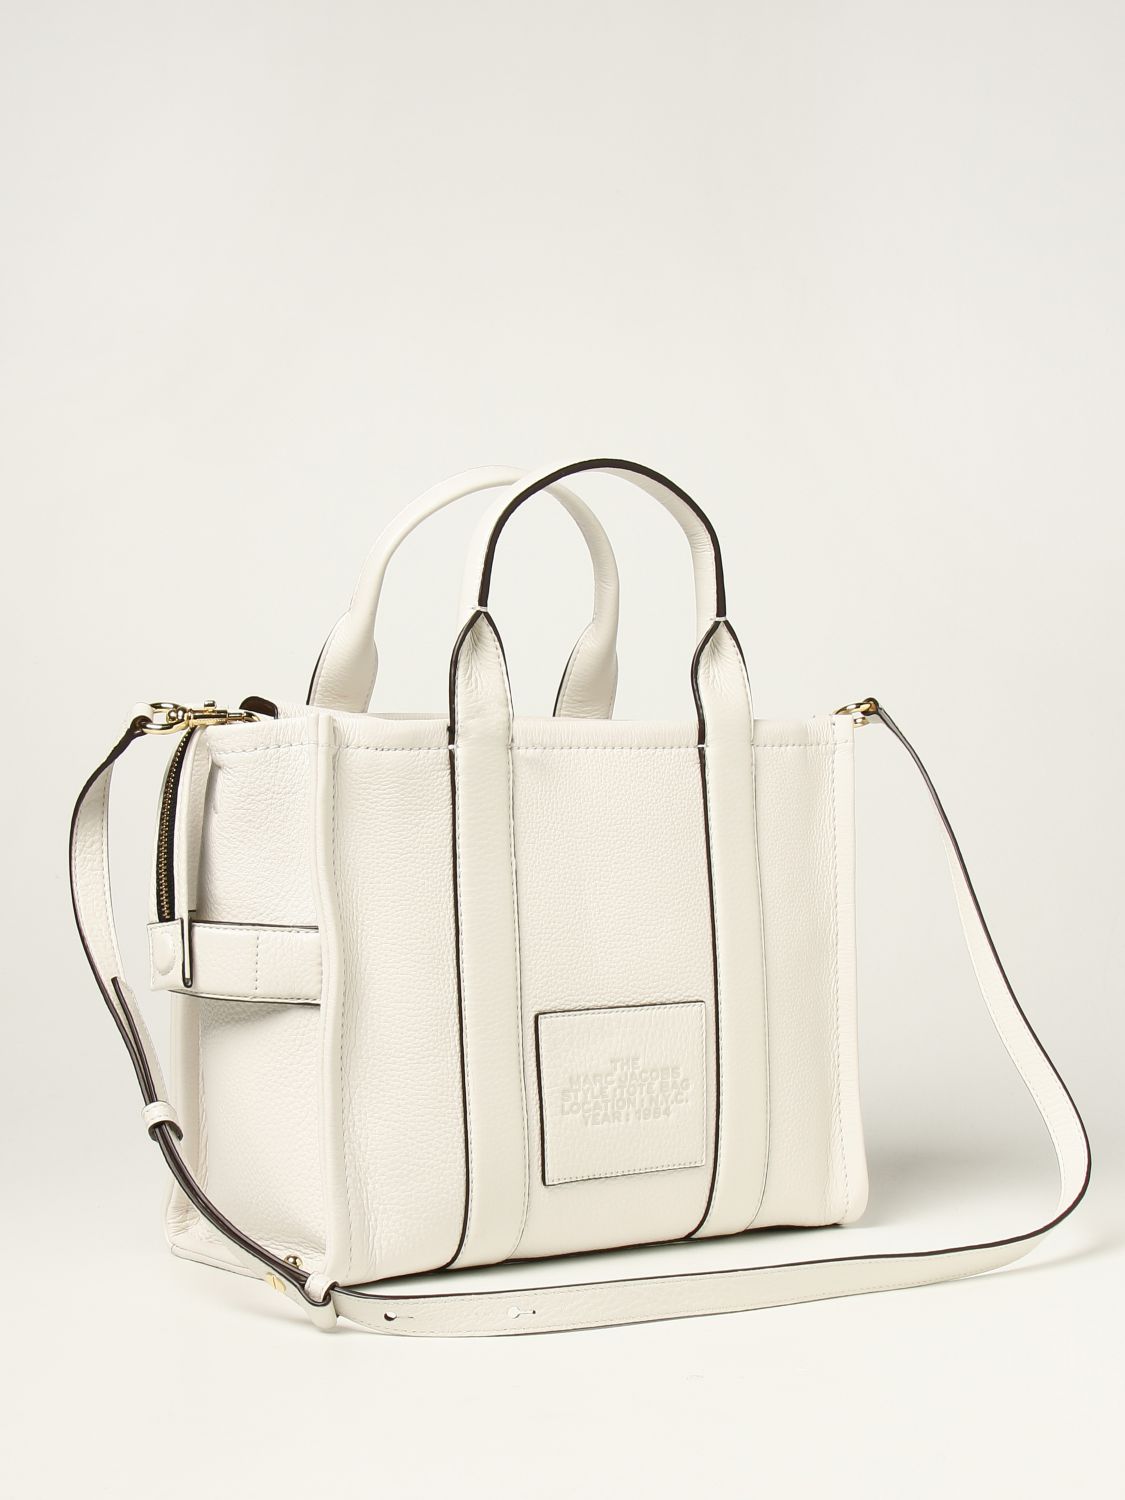 MARC JACOBS: The Tote Bag in leather - White  Marc Jacobs tote bags  H004L01PF21 online at